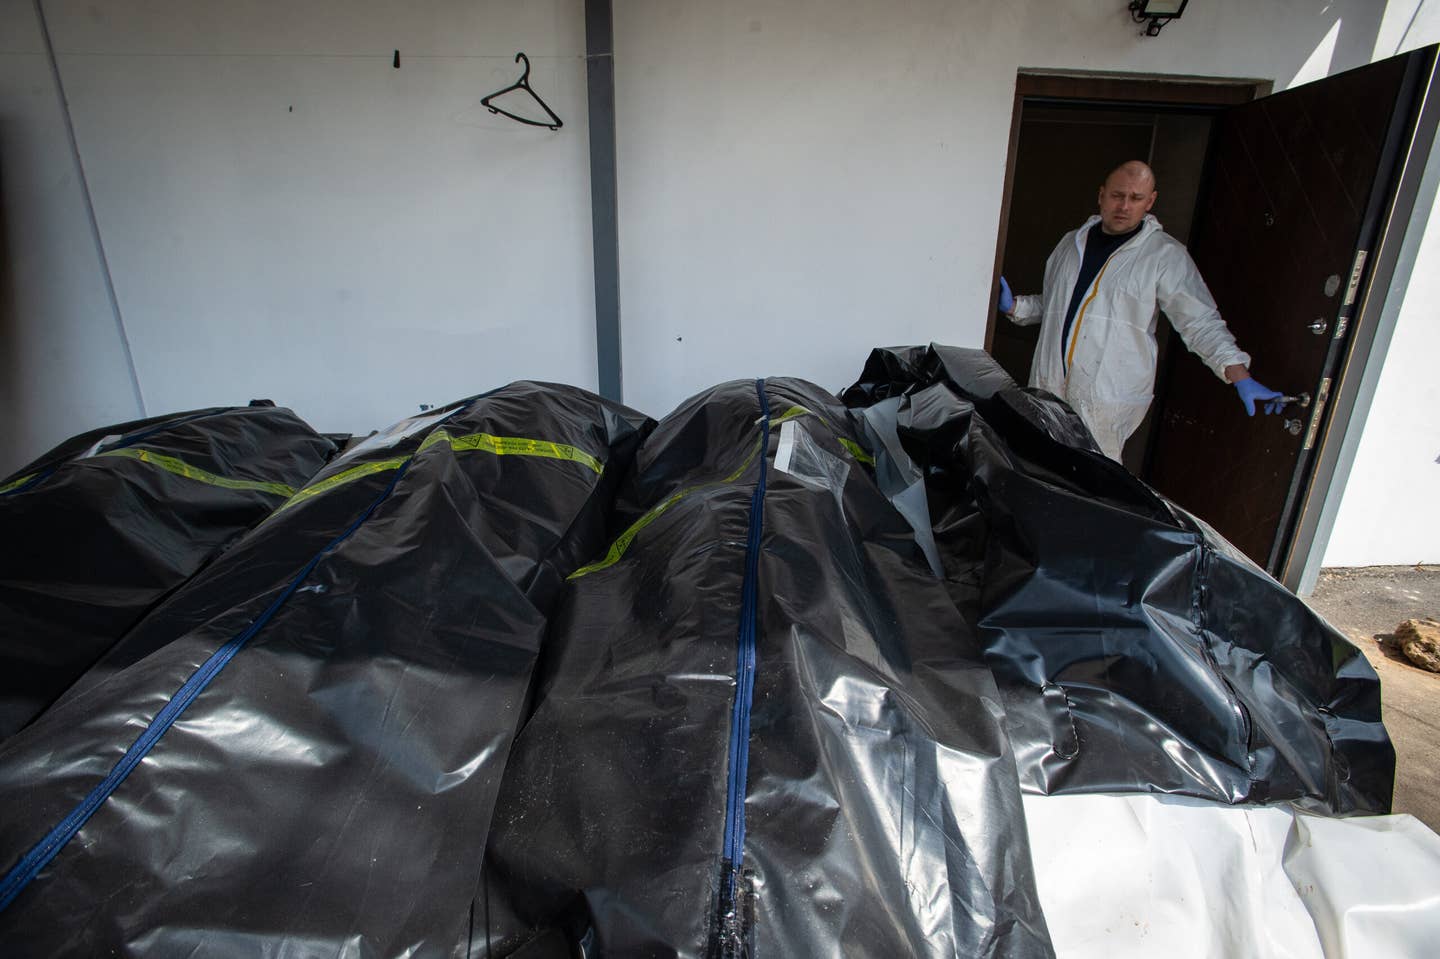 Ukrainian morticians look at body bags full of corpses, as a morgue overflows with victims who died during the Russian military presence in the Kyiv suburb of Bucha, Ukraine, on April 23, 2022. <em>Photo by Scott Peterson/Getty Images</em>